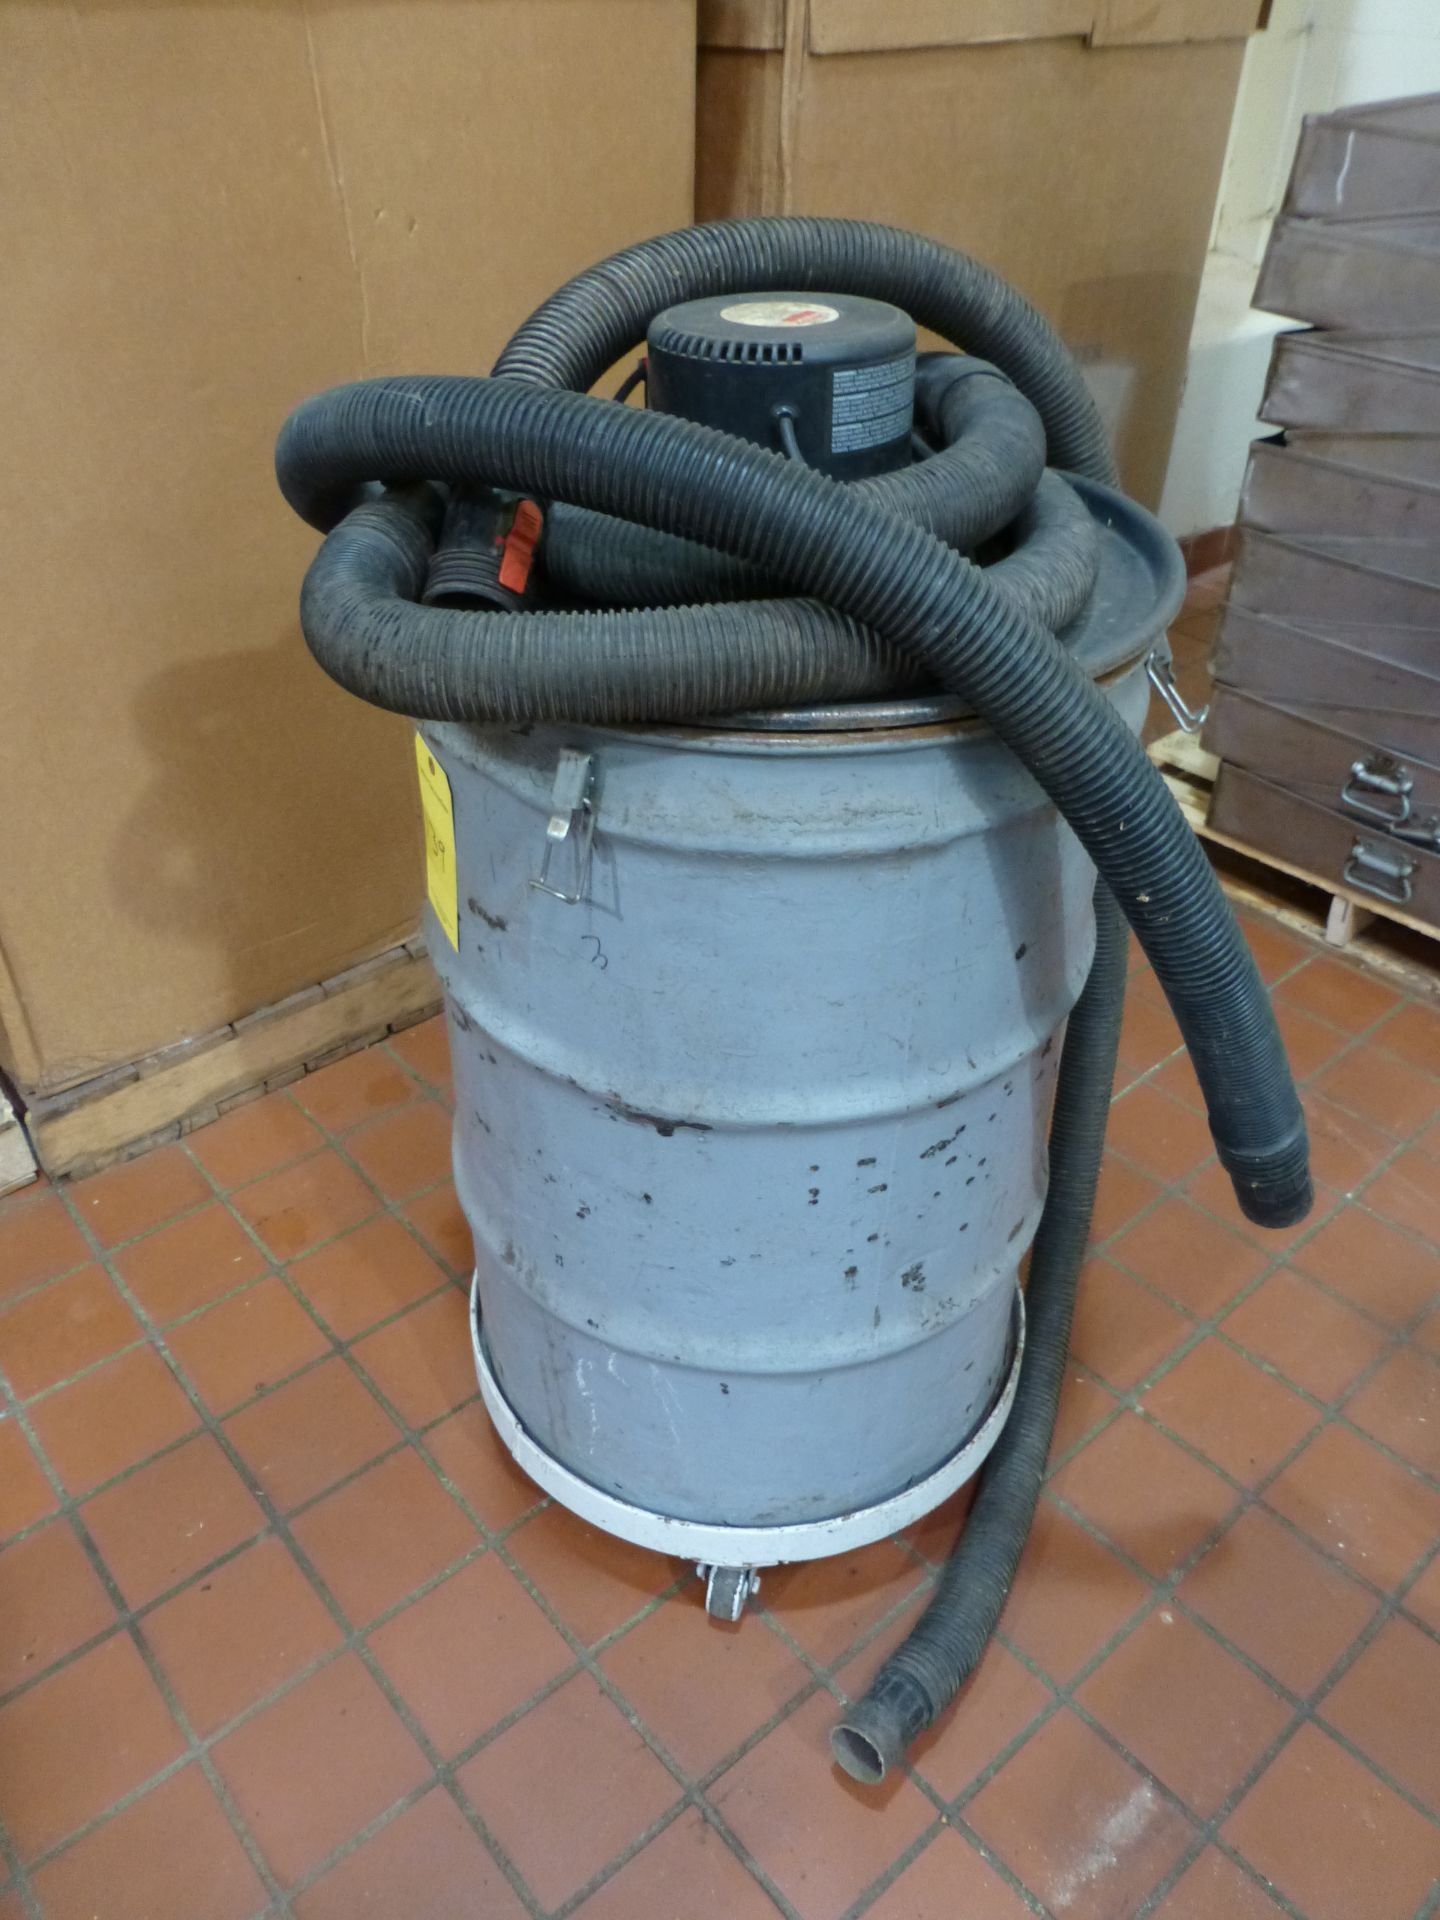 Dayton 55 Gallon Drum Wet/Dry Vacuum w/Casters - Tag 49139 - Image 2 of 3